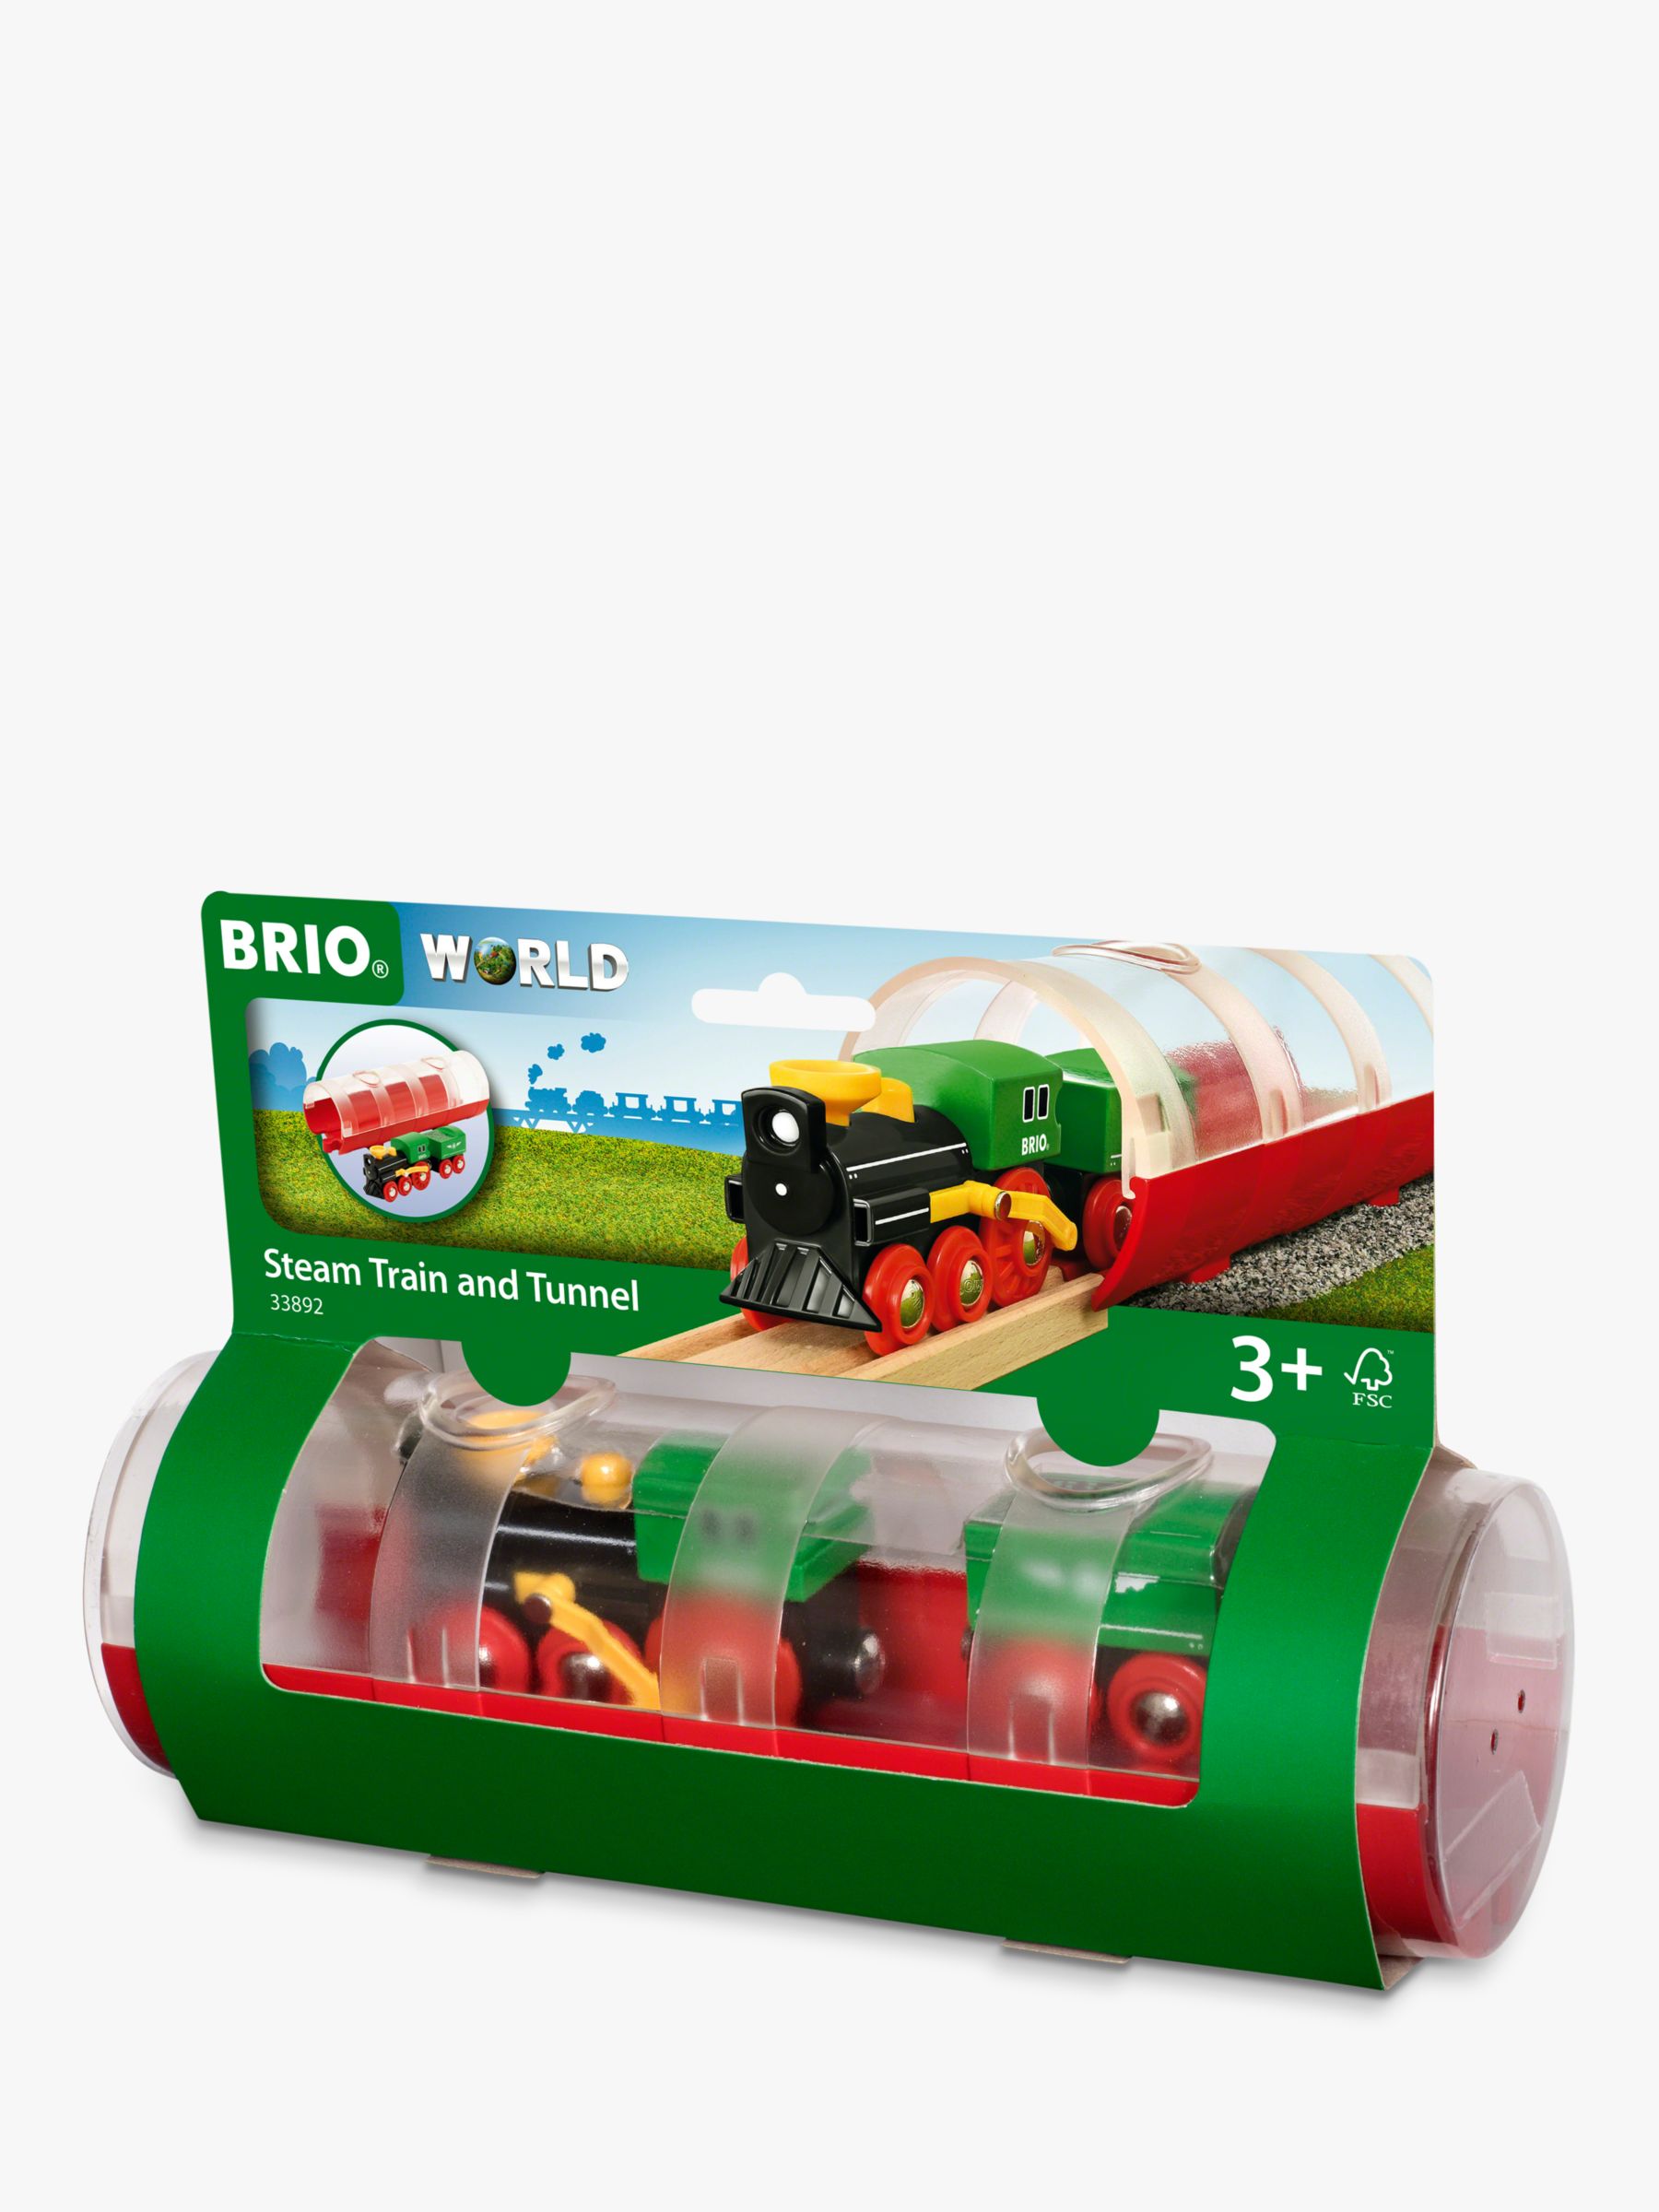 best place to buy brio trains